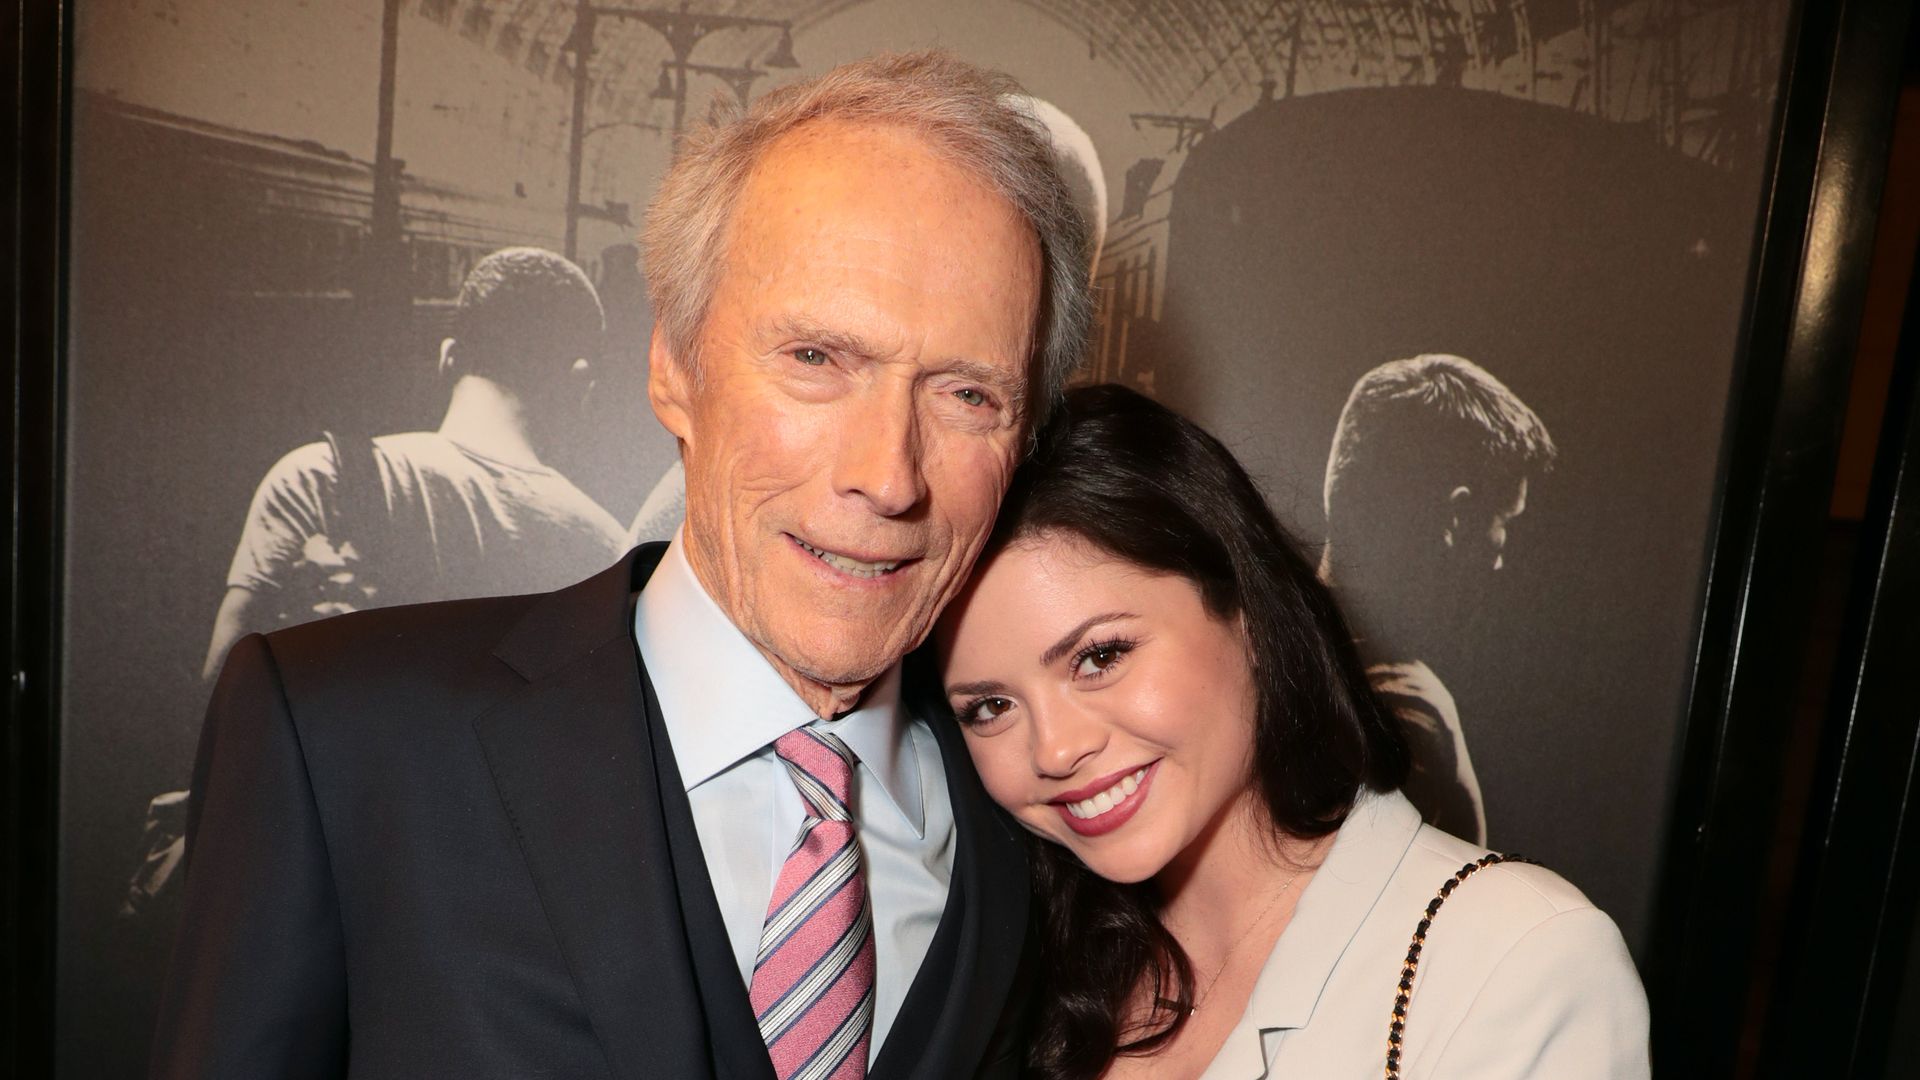 Clint Eastwood and daughter Morgan Eastwood seen at Warner Bros. Pictures 'The 15:17 to Paris' World Premiere, Los Angeles, CA, USA - 5 February 2018 